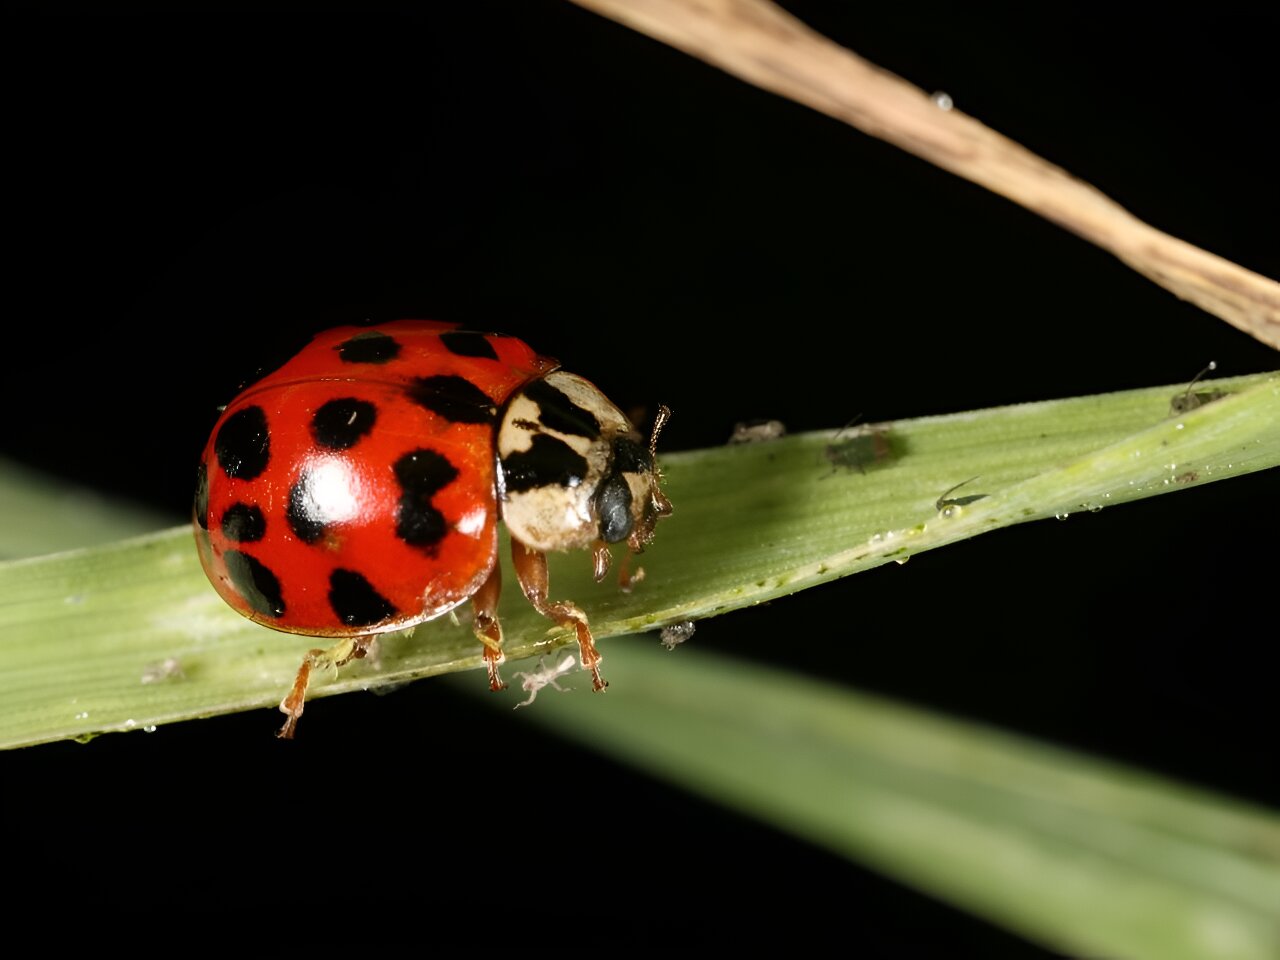 Ladybug scents offer a more ecologically friendly way to protect crops